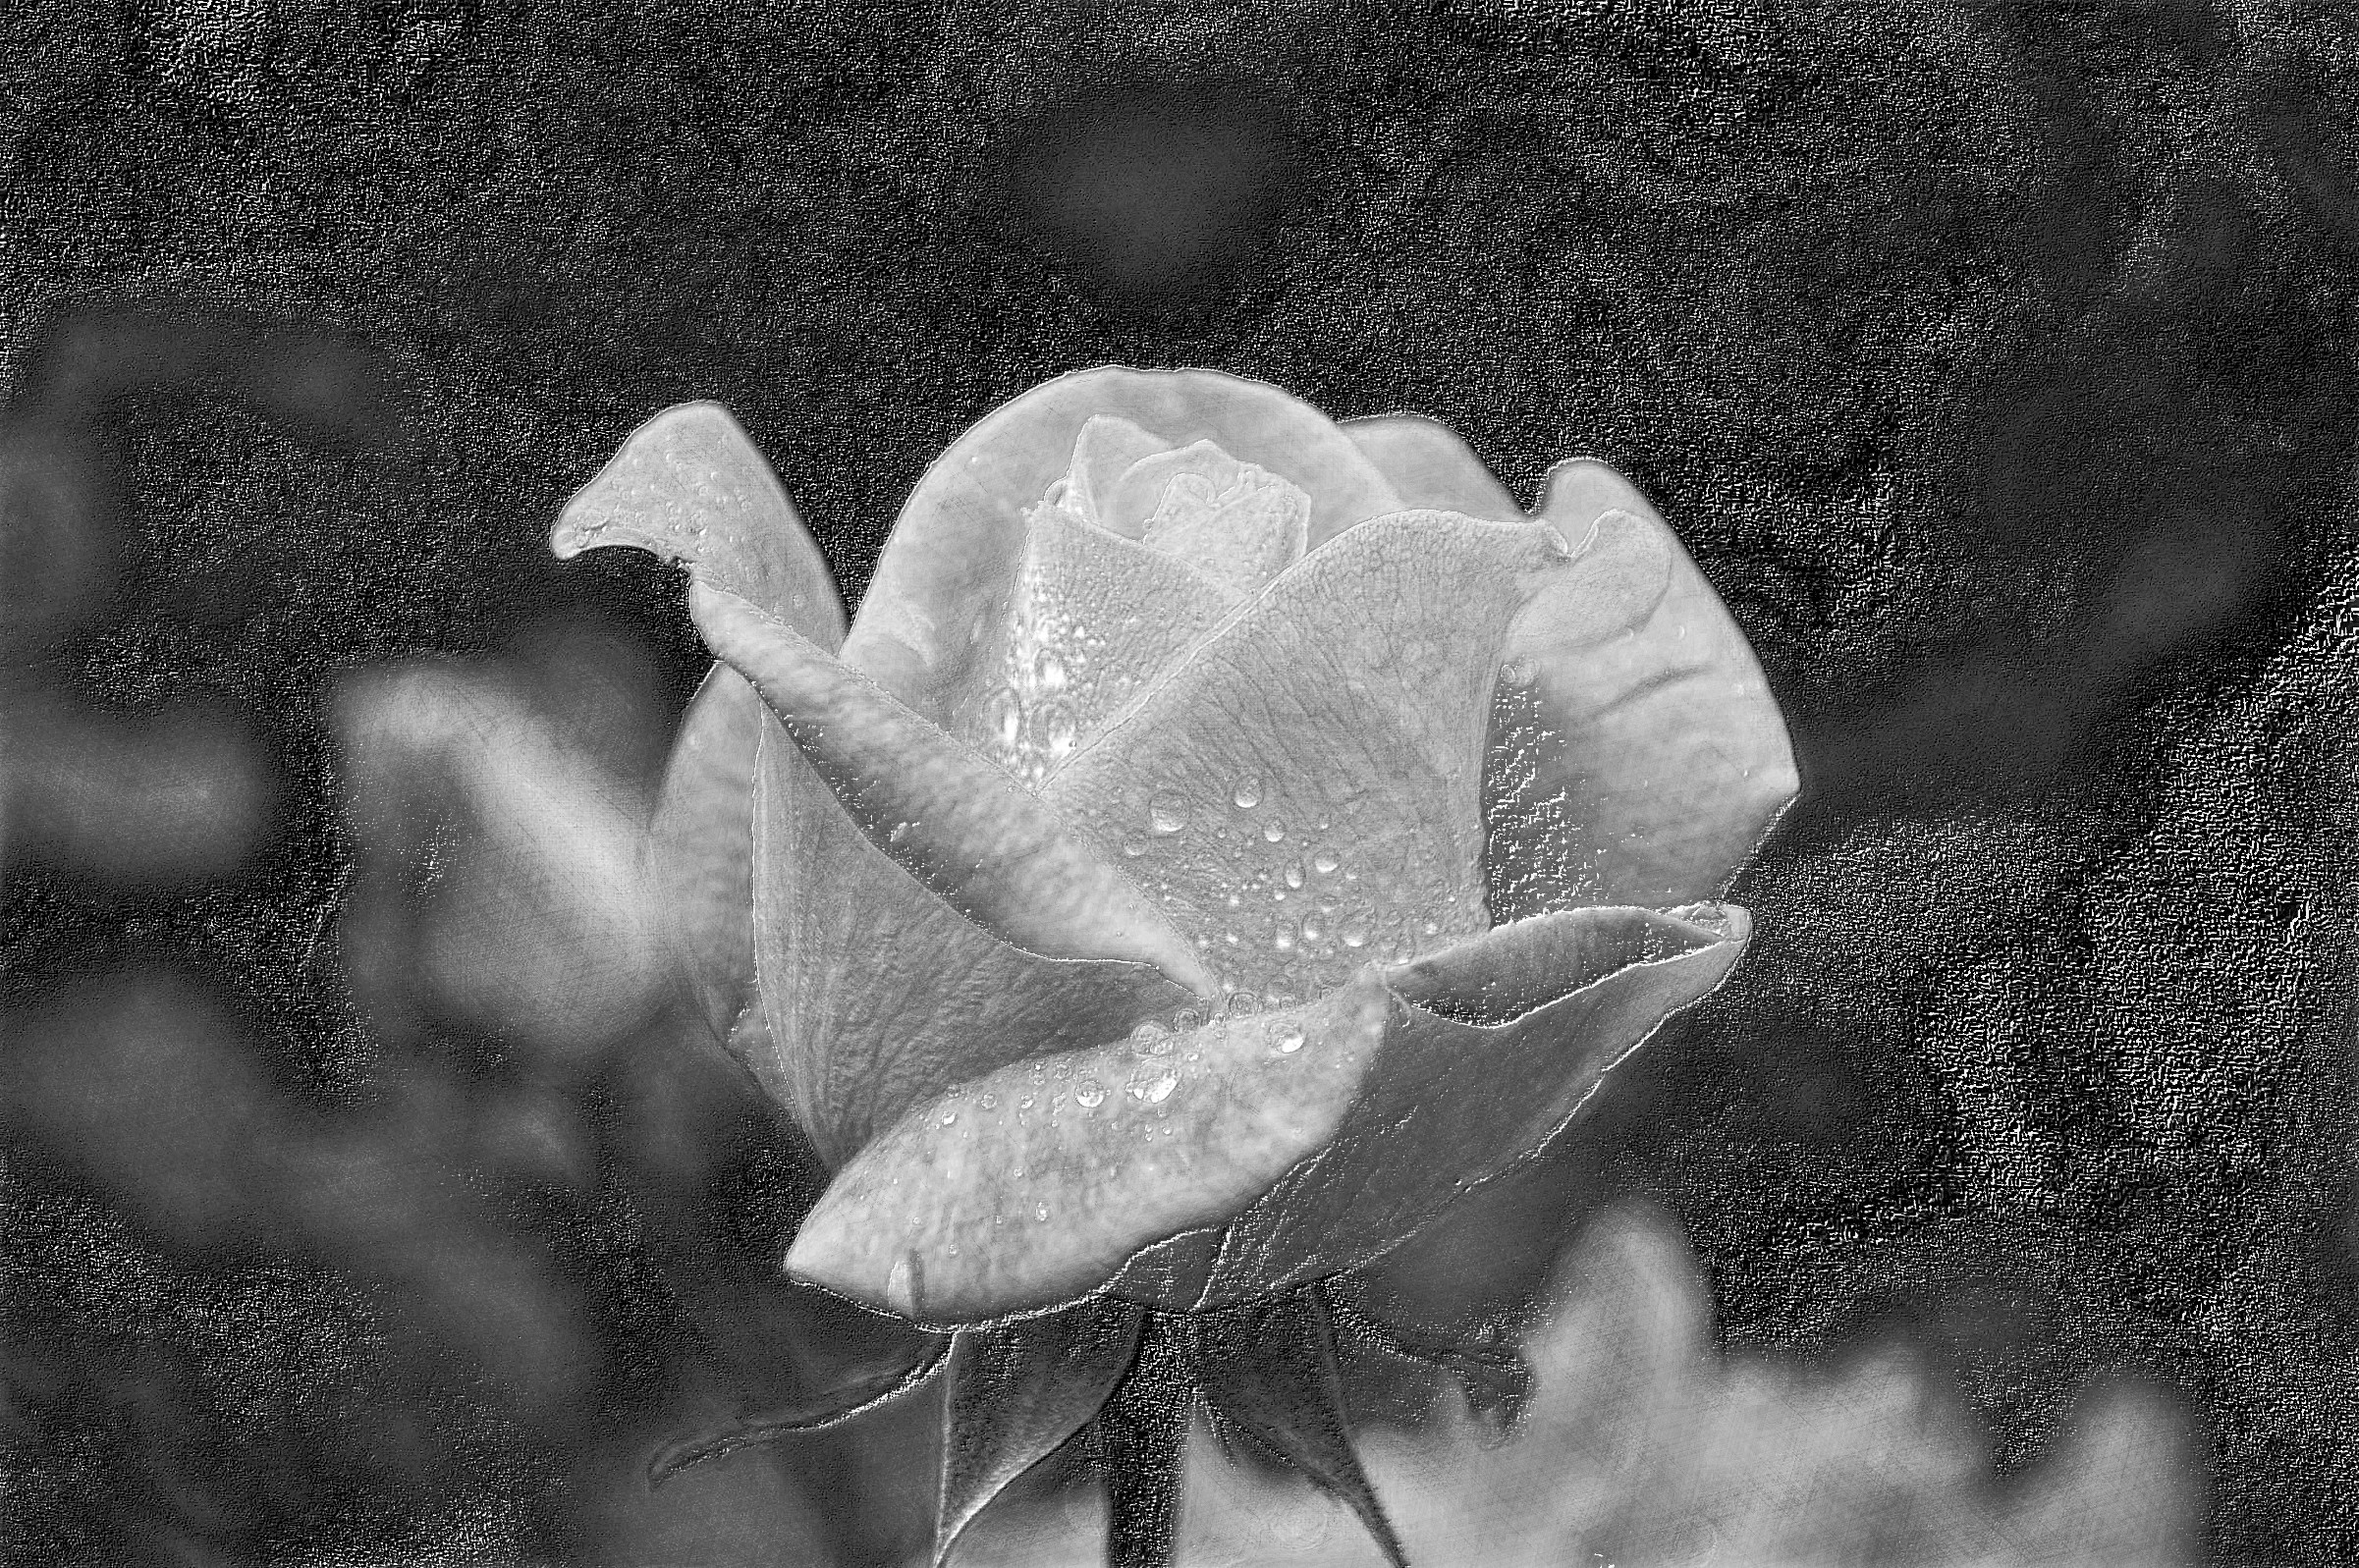 2020-08-25 06-58-32bloom-blossom-dew-56866 with a draw effect, using option B&W and pencil lead=HB (std desat).jpg